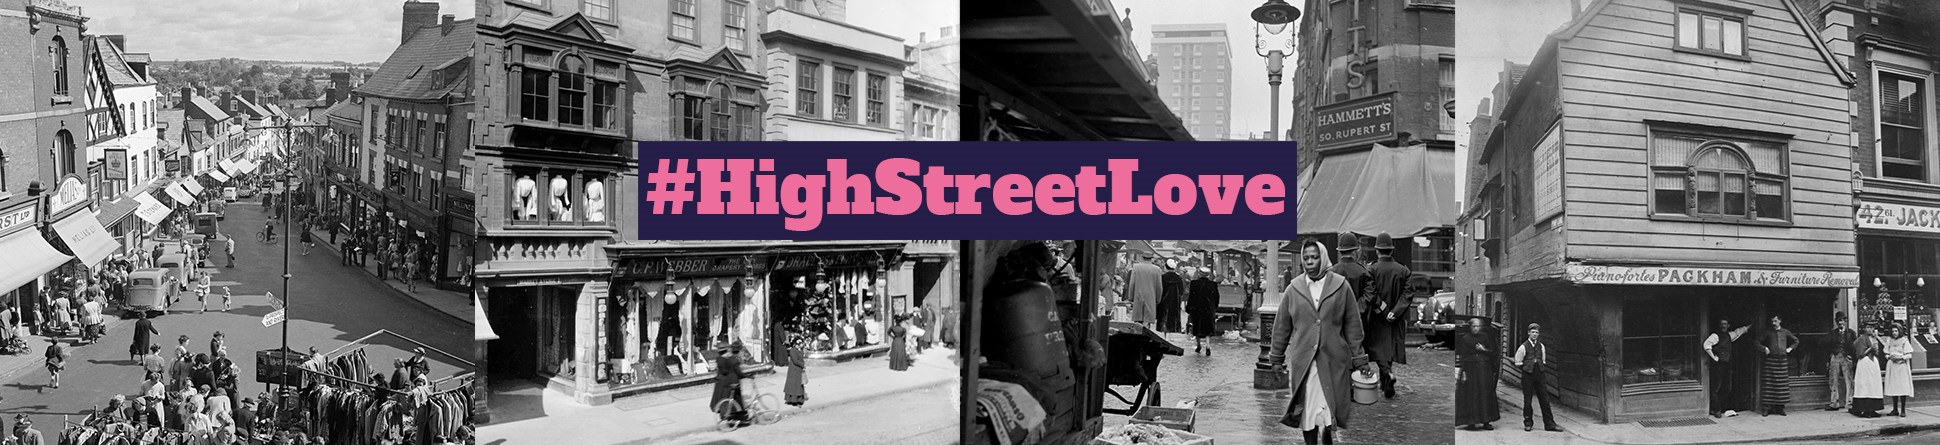 HighStreetLove hashtag with black and white photos of high street shops